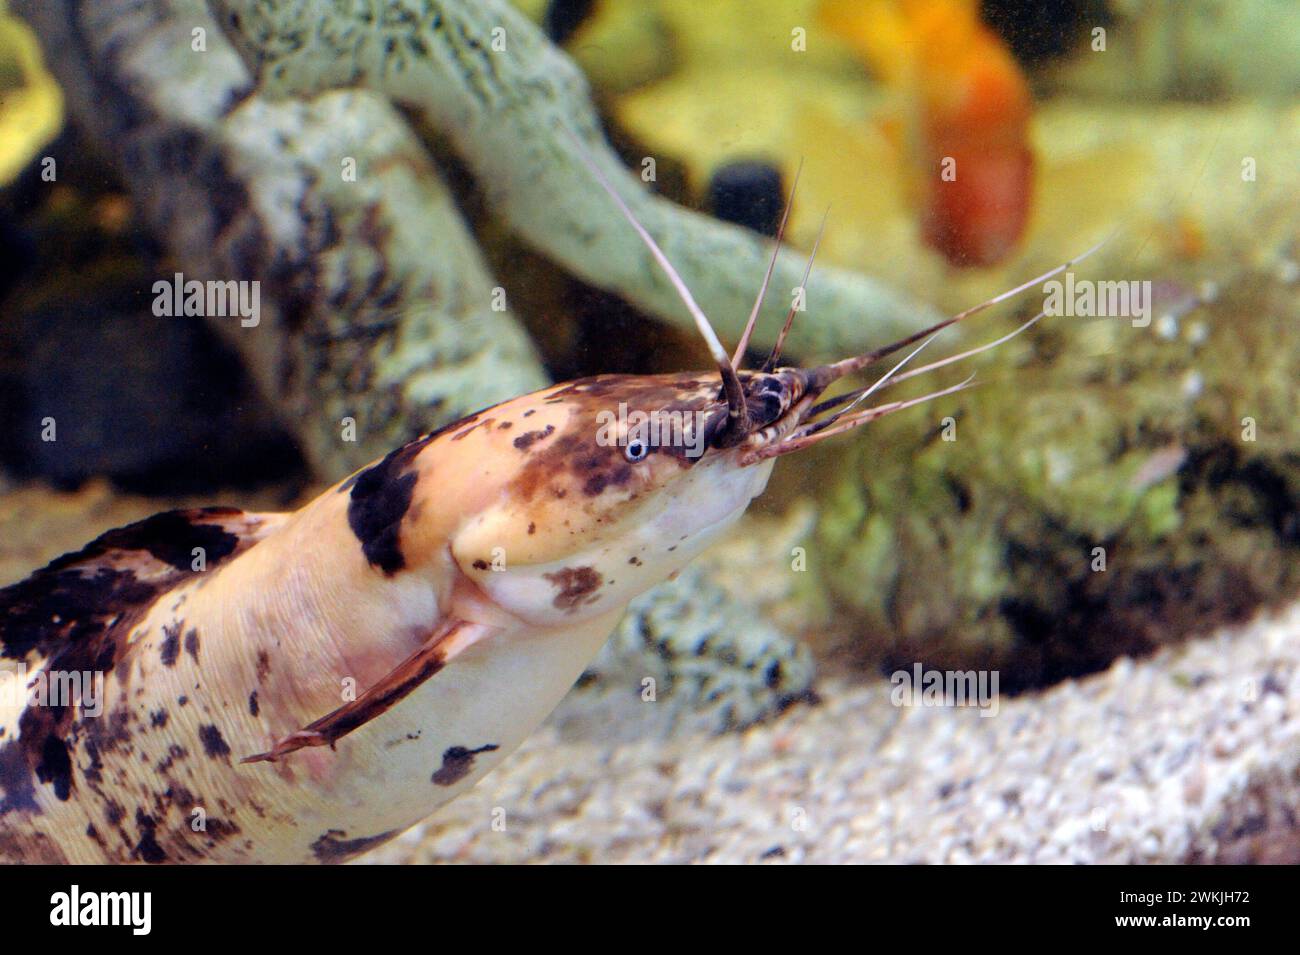 Walking catfish (Clarias batrachus) is a omnivorous fresh water fish native to southeast Asia rivers. Stock Photo